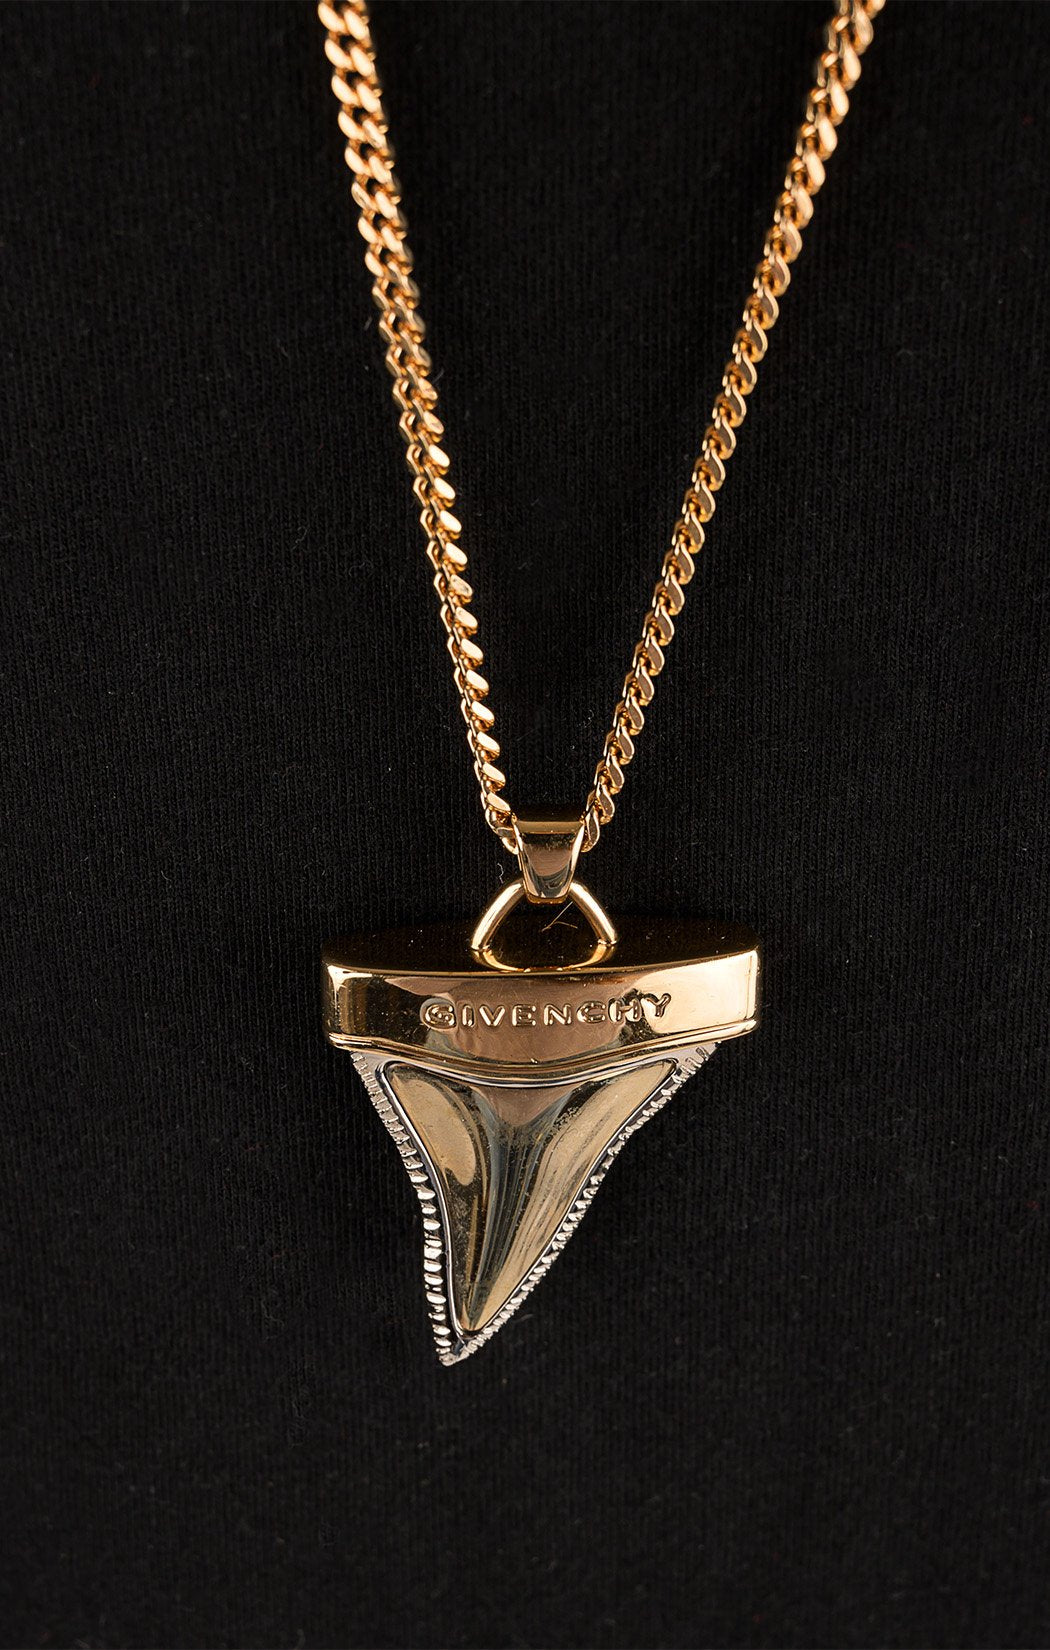 givenchy necklace